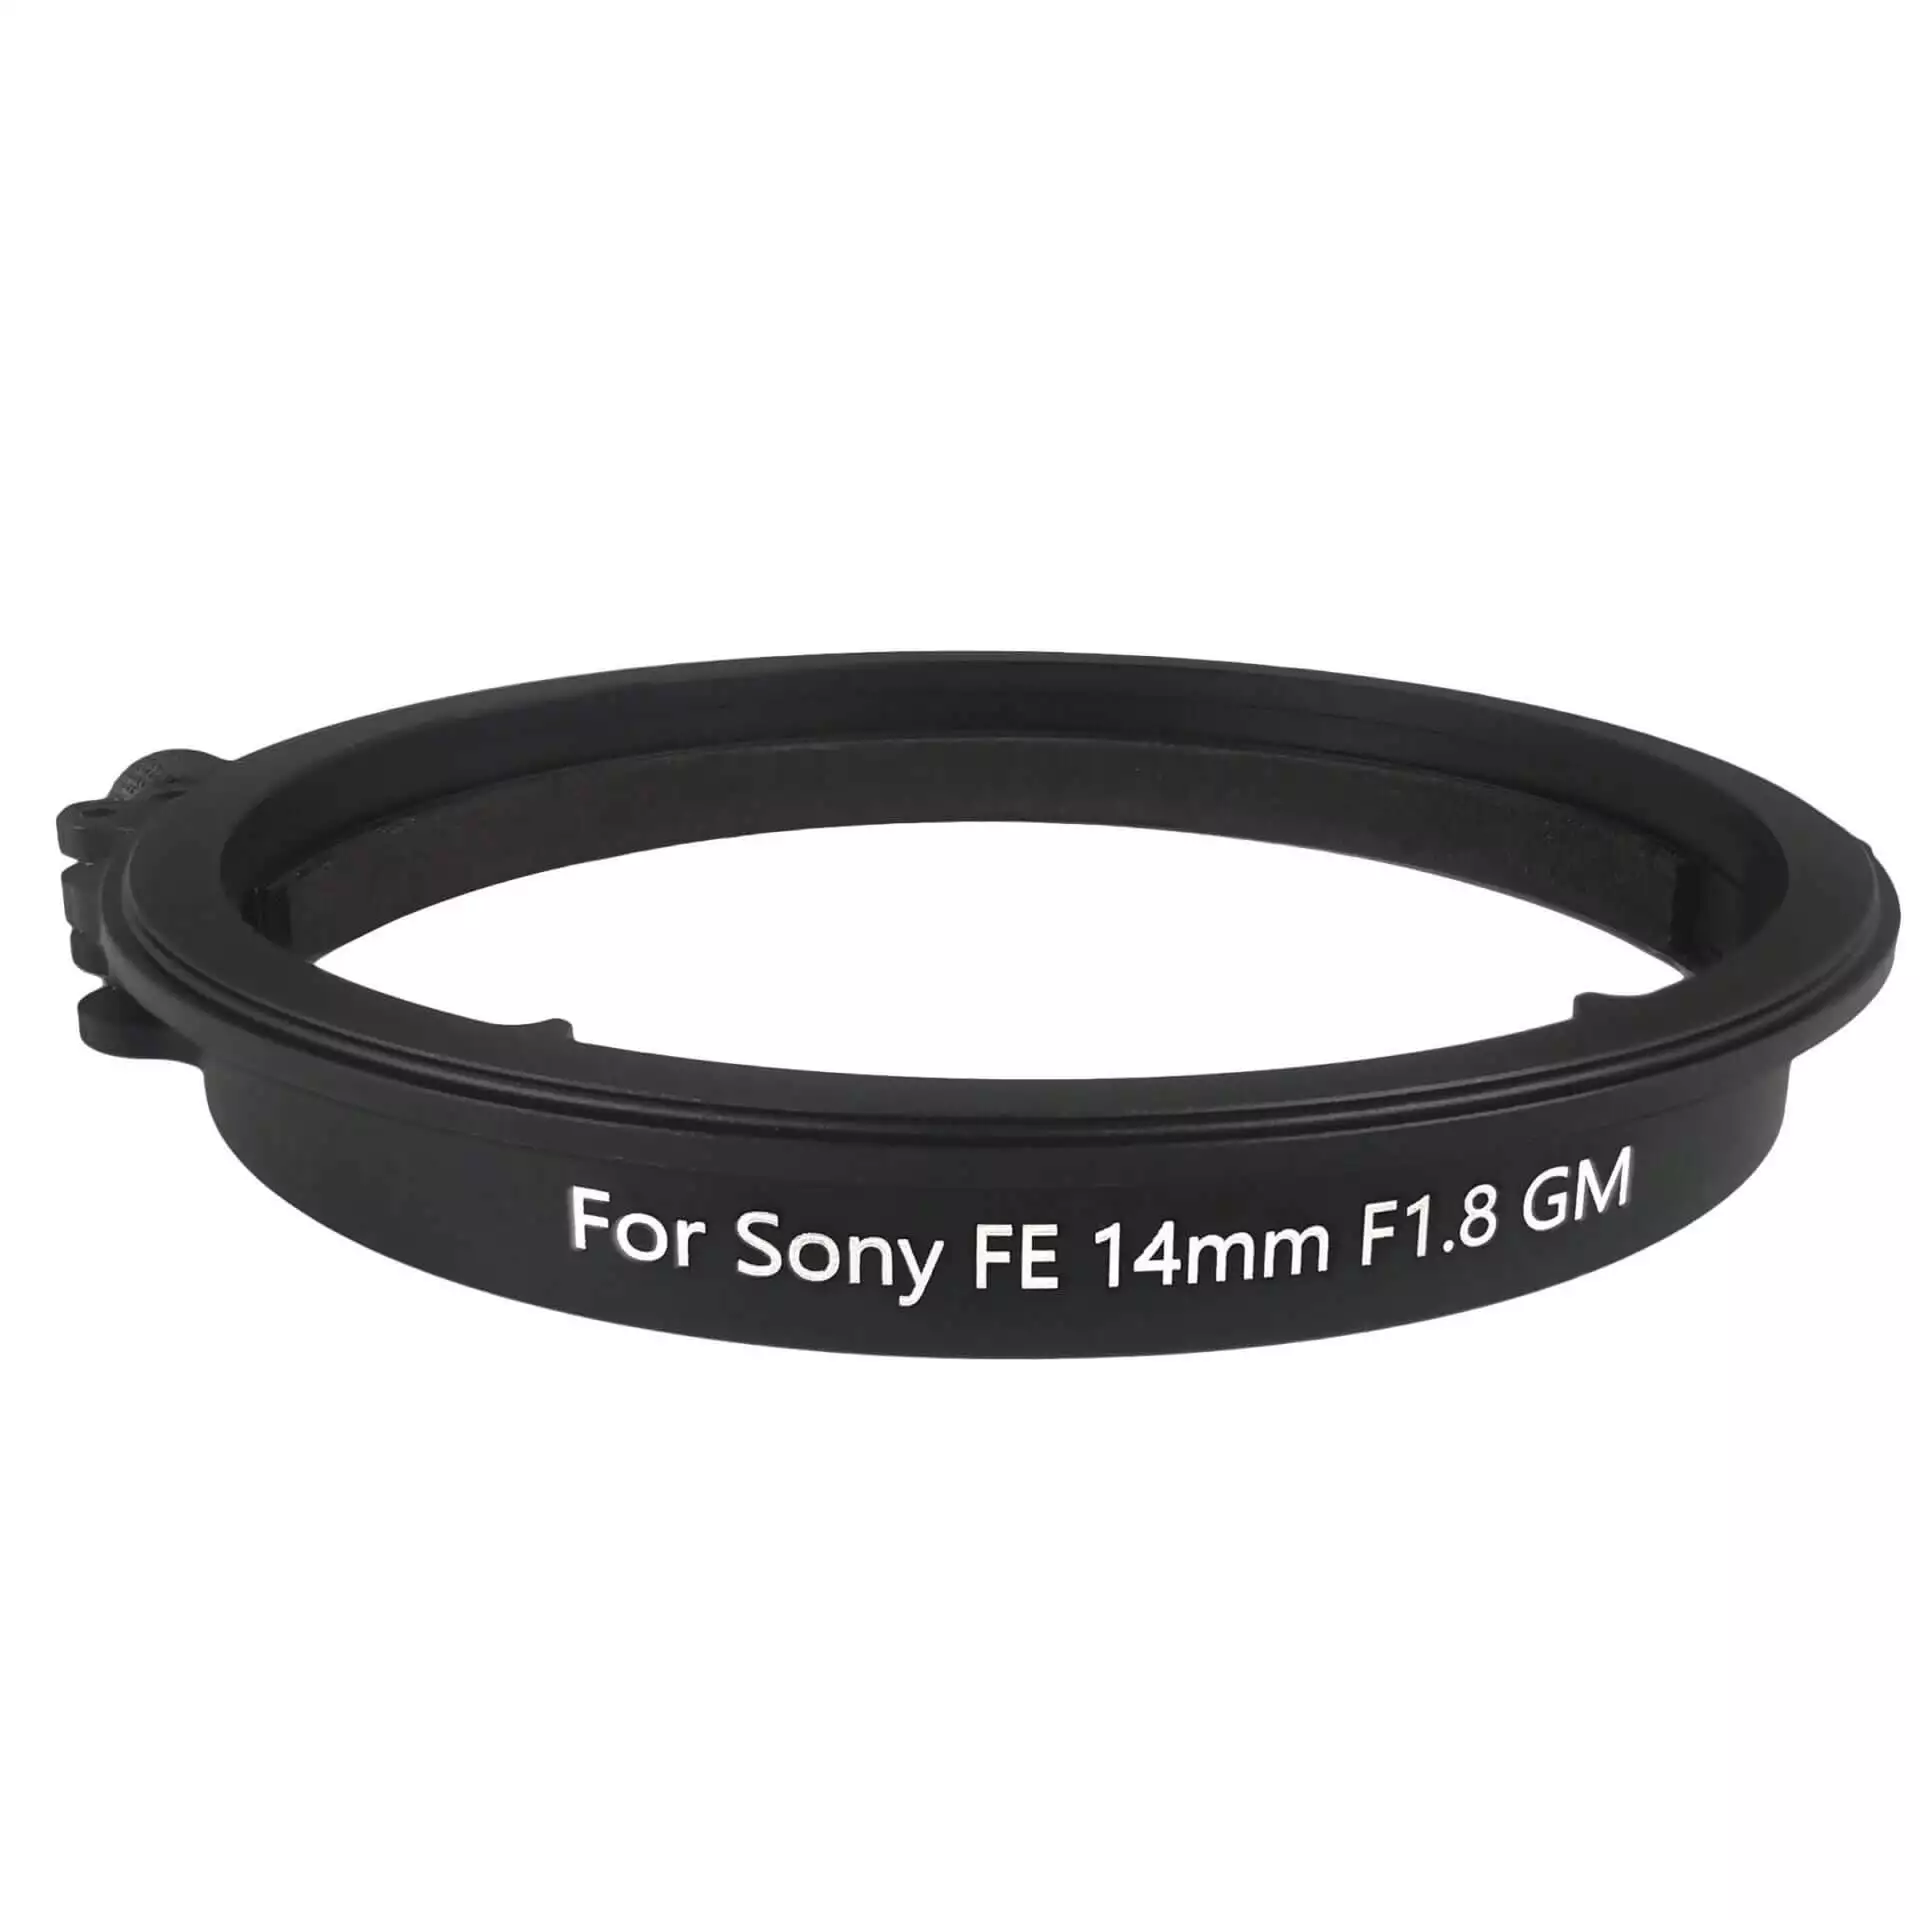 H&Y Adapter Ring for Sony FE 14mm f1.8 GM